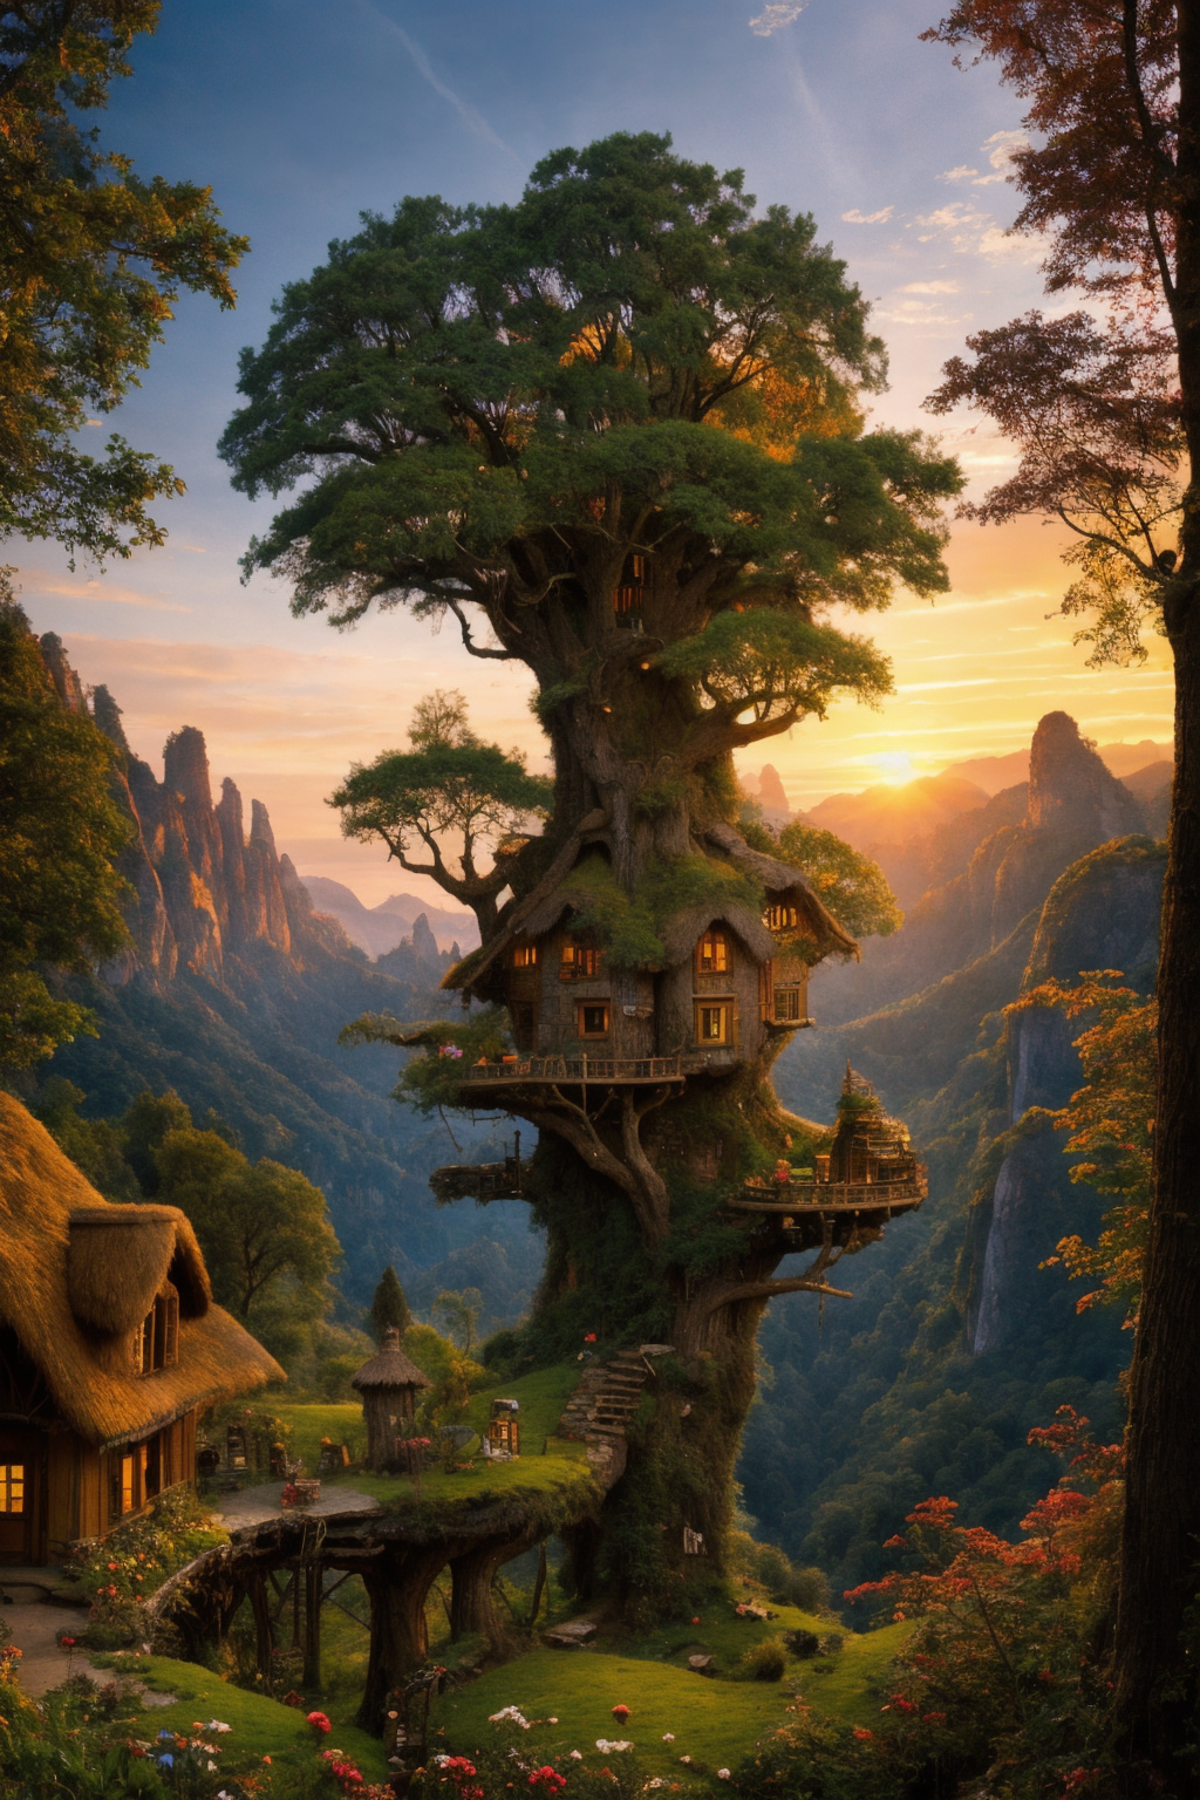 A magical scene of a tree with a house in it and a sunset over a mountain.